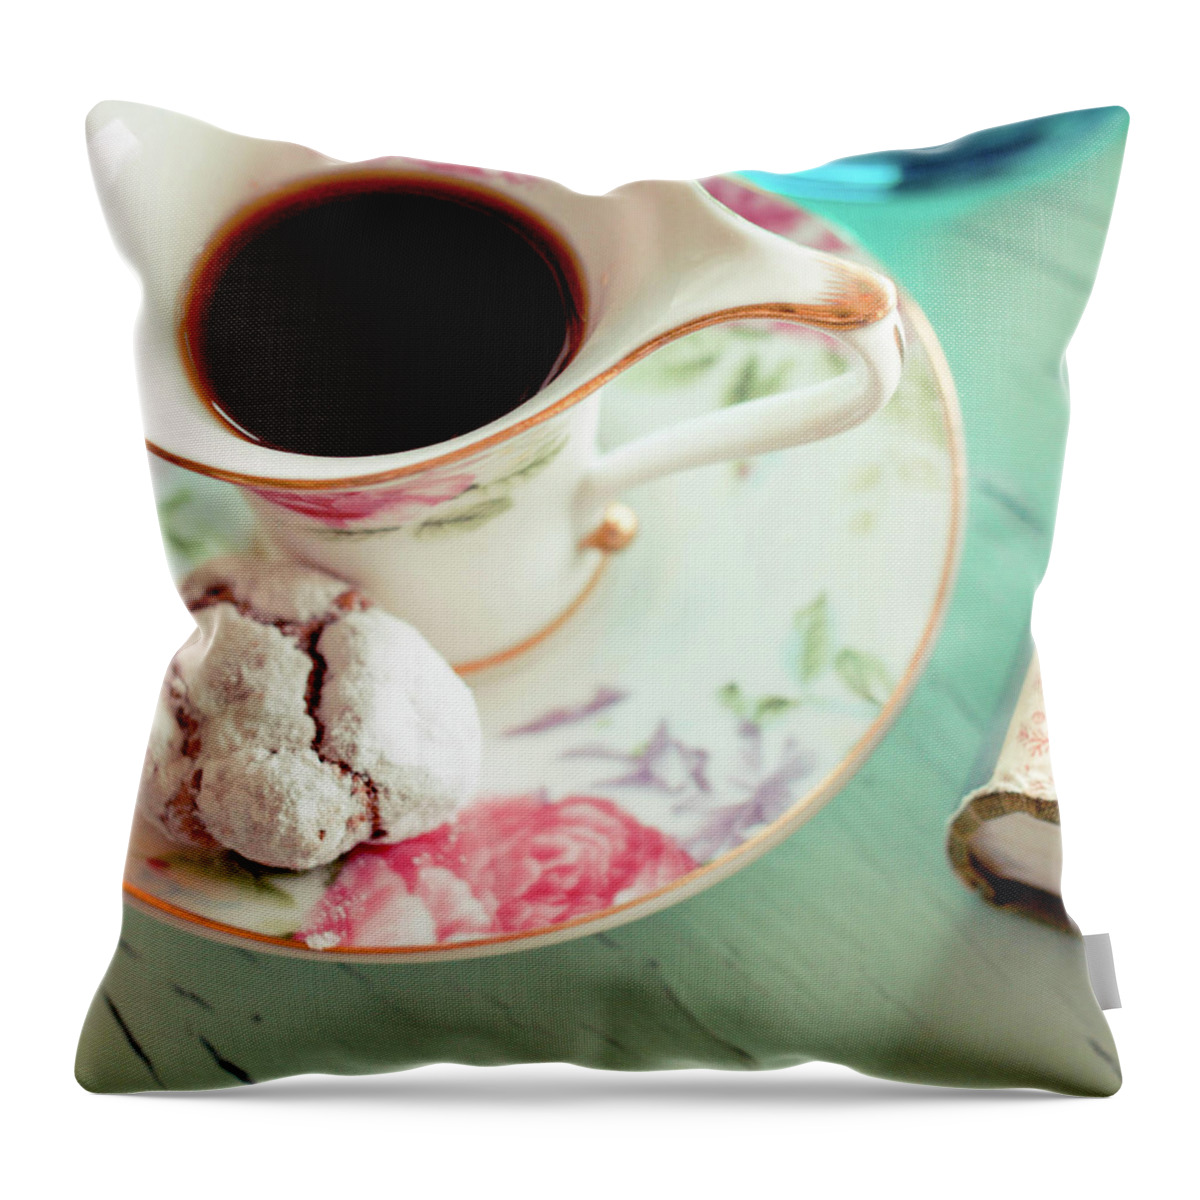 Venezuela Throw Pillow featuring the photograph Cookies And Black Coffe by Carmen Moreno Photography